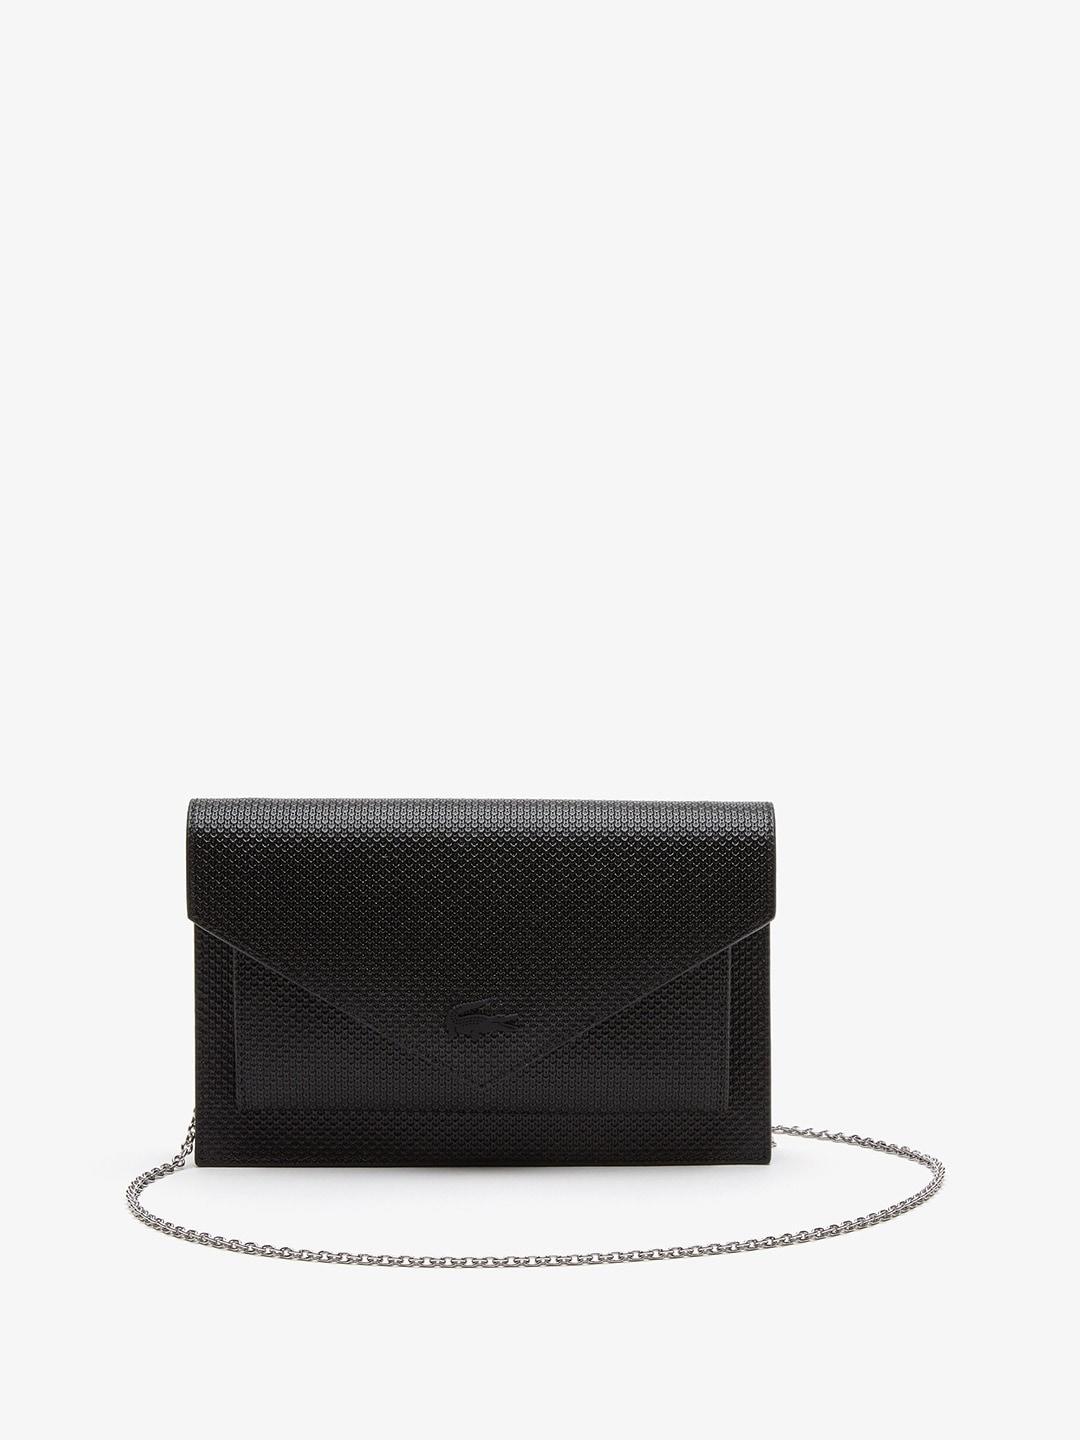 lacoste-chantaco-smooth-leather-envelope-clutch